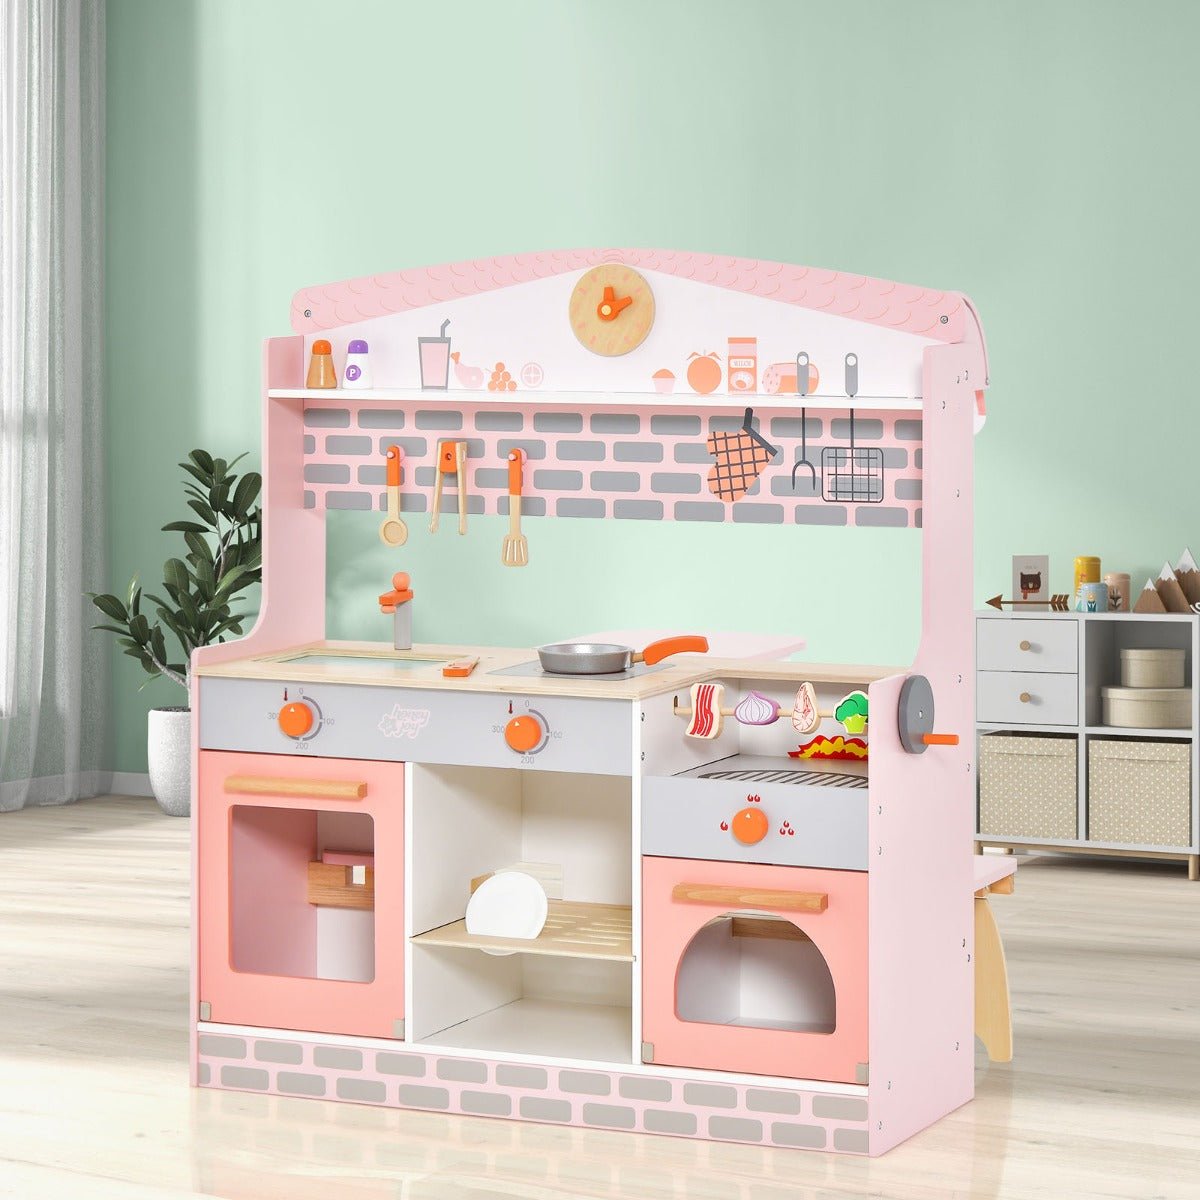 Pink Play Kitchen with Stove and Grill